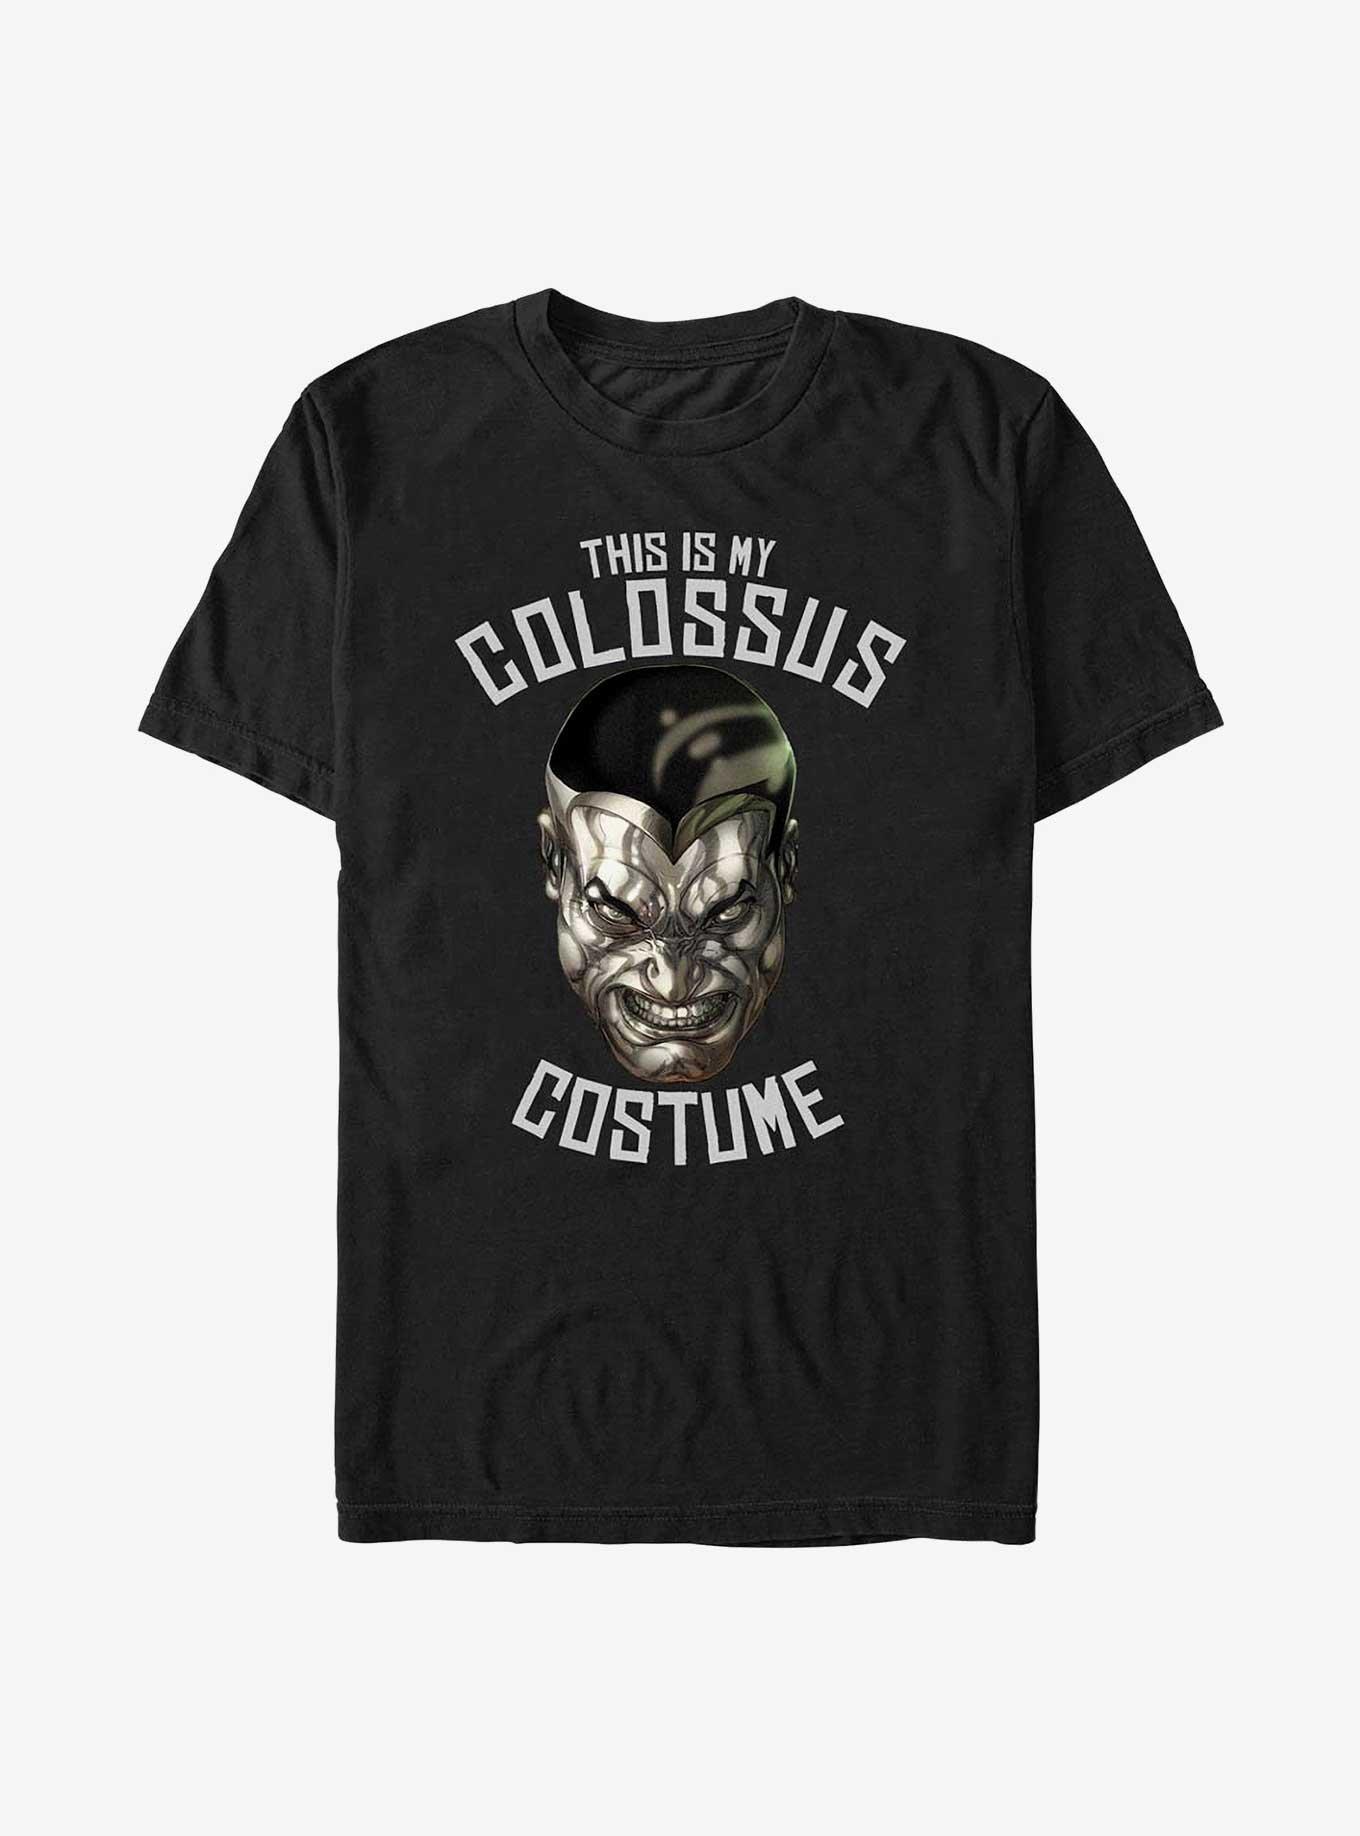 Marvel X-Men This Is My Colossus Costume T-Shirt